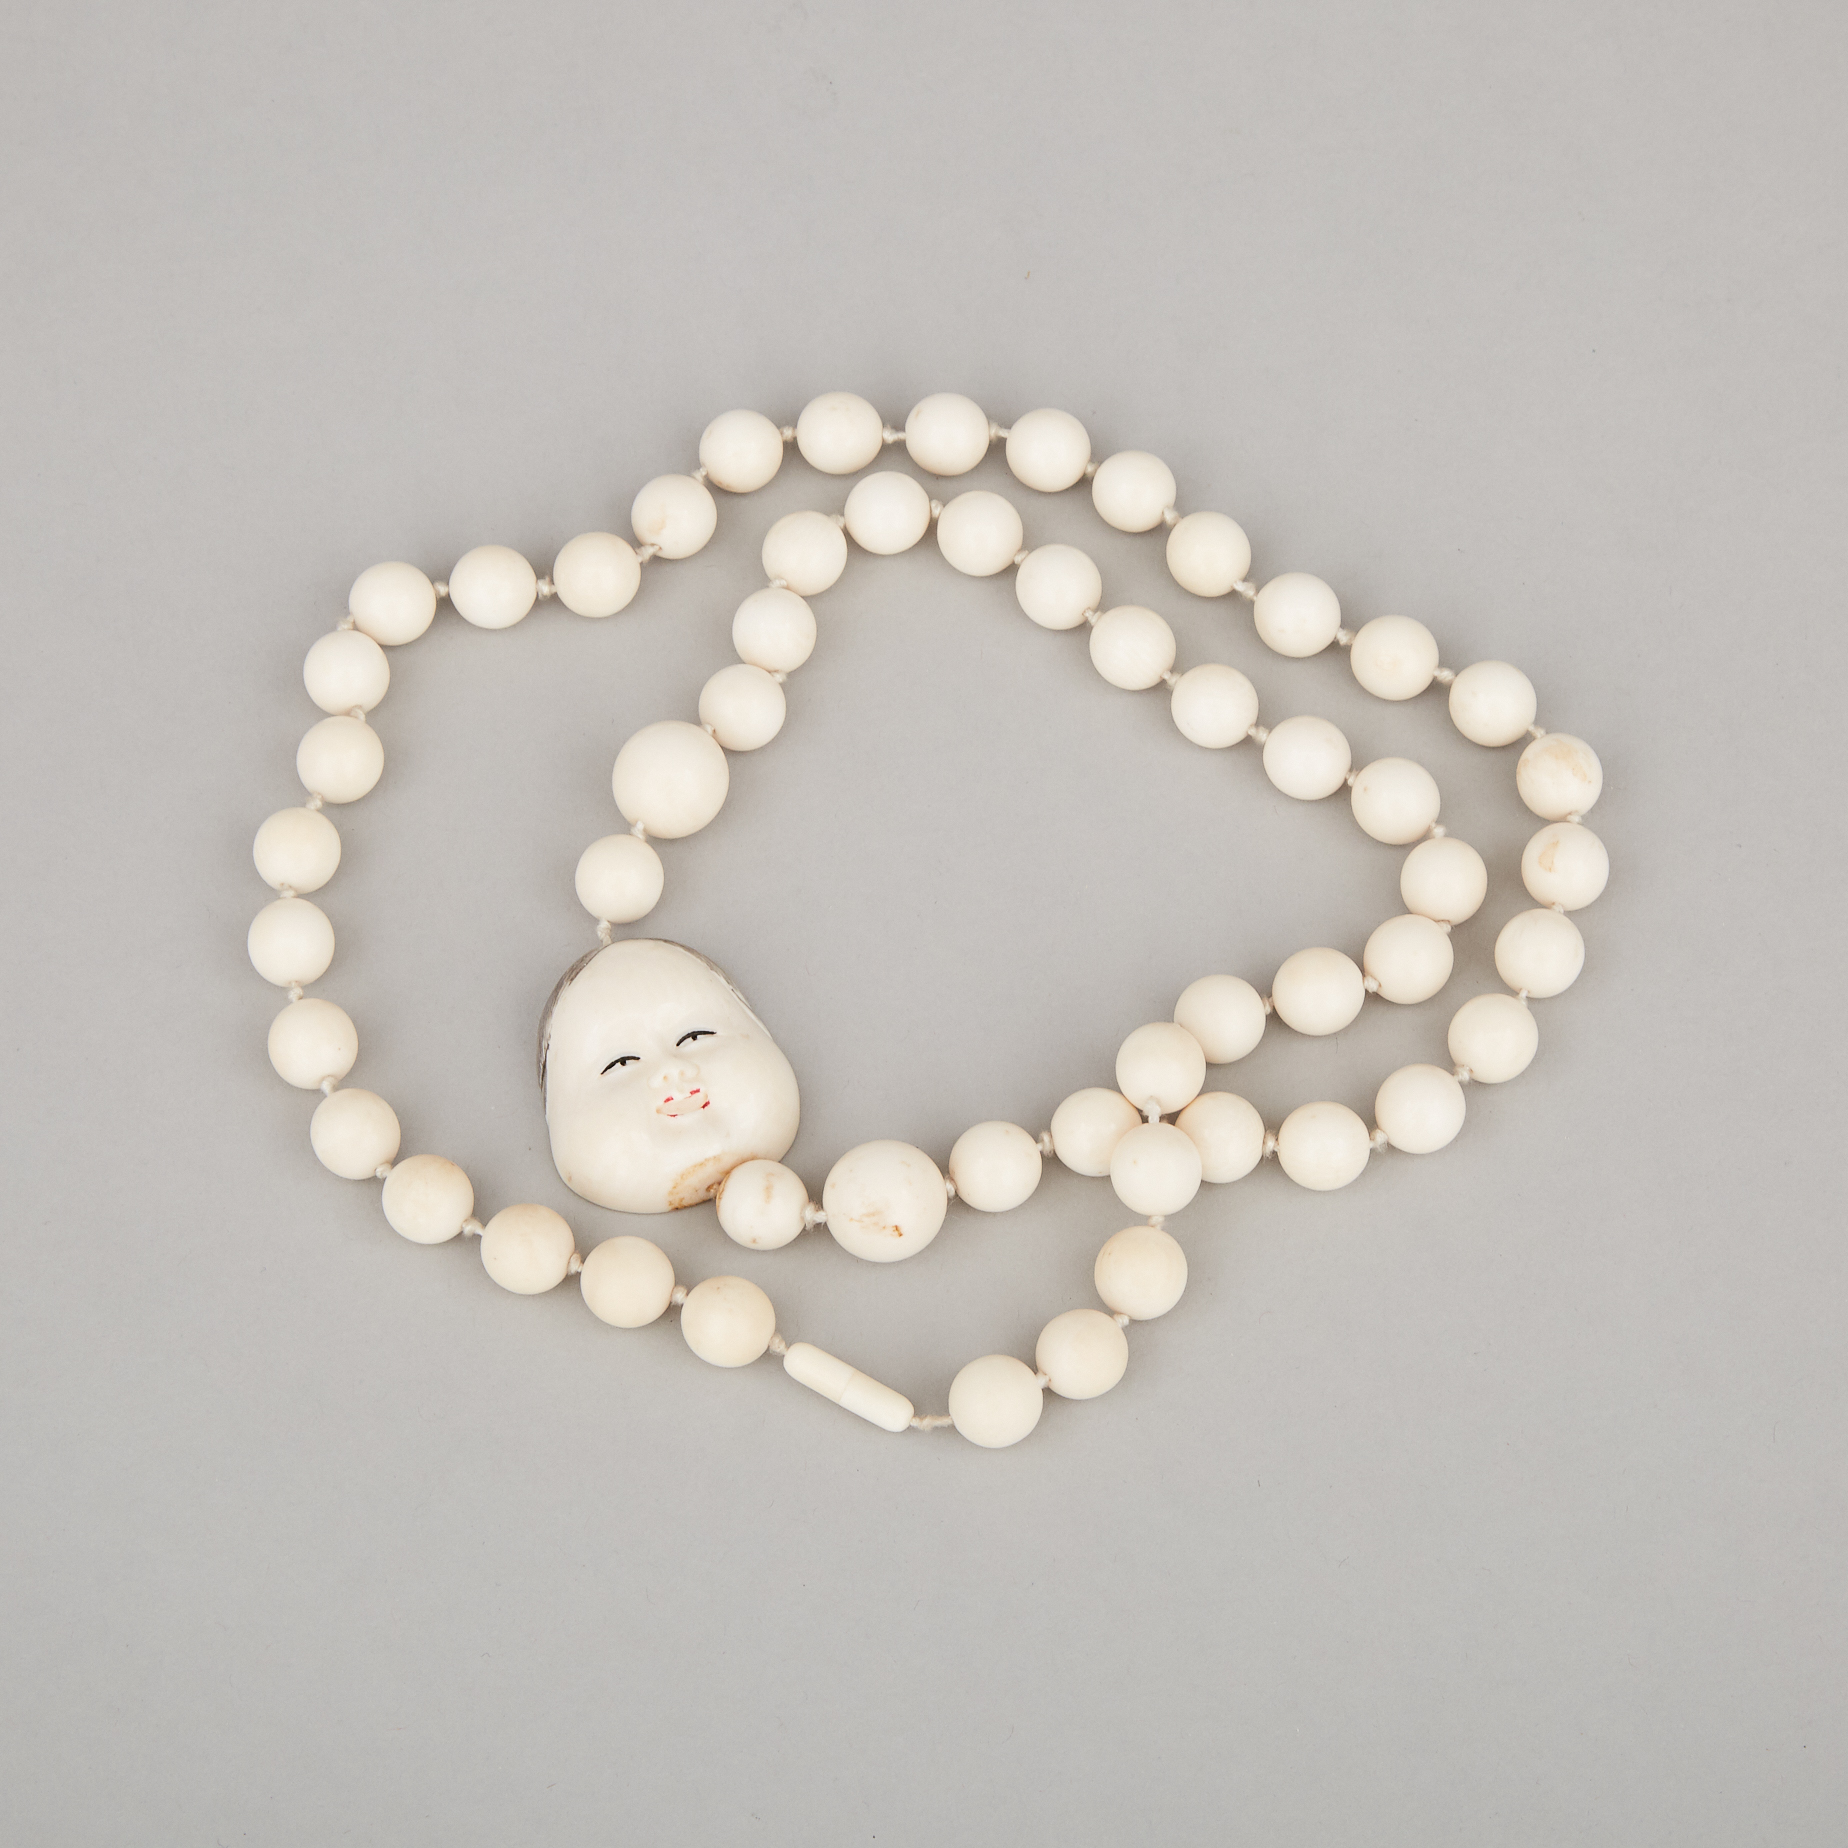 An Ivory Japanese Mask Beaded Necklace, Circa 1940